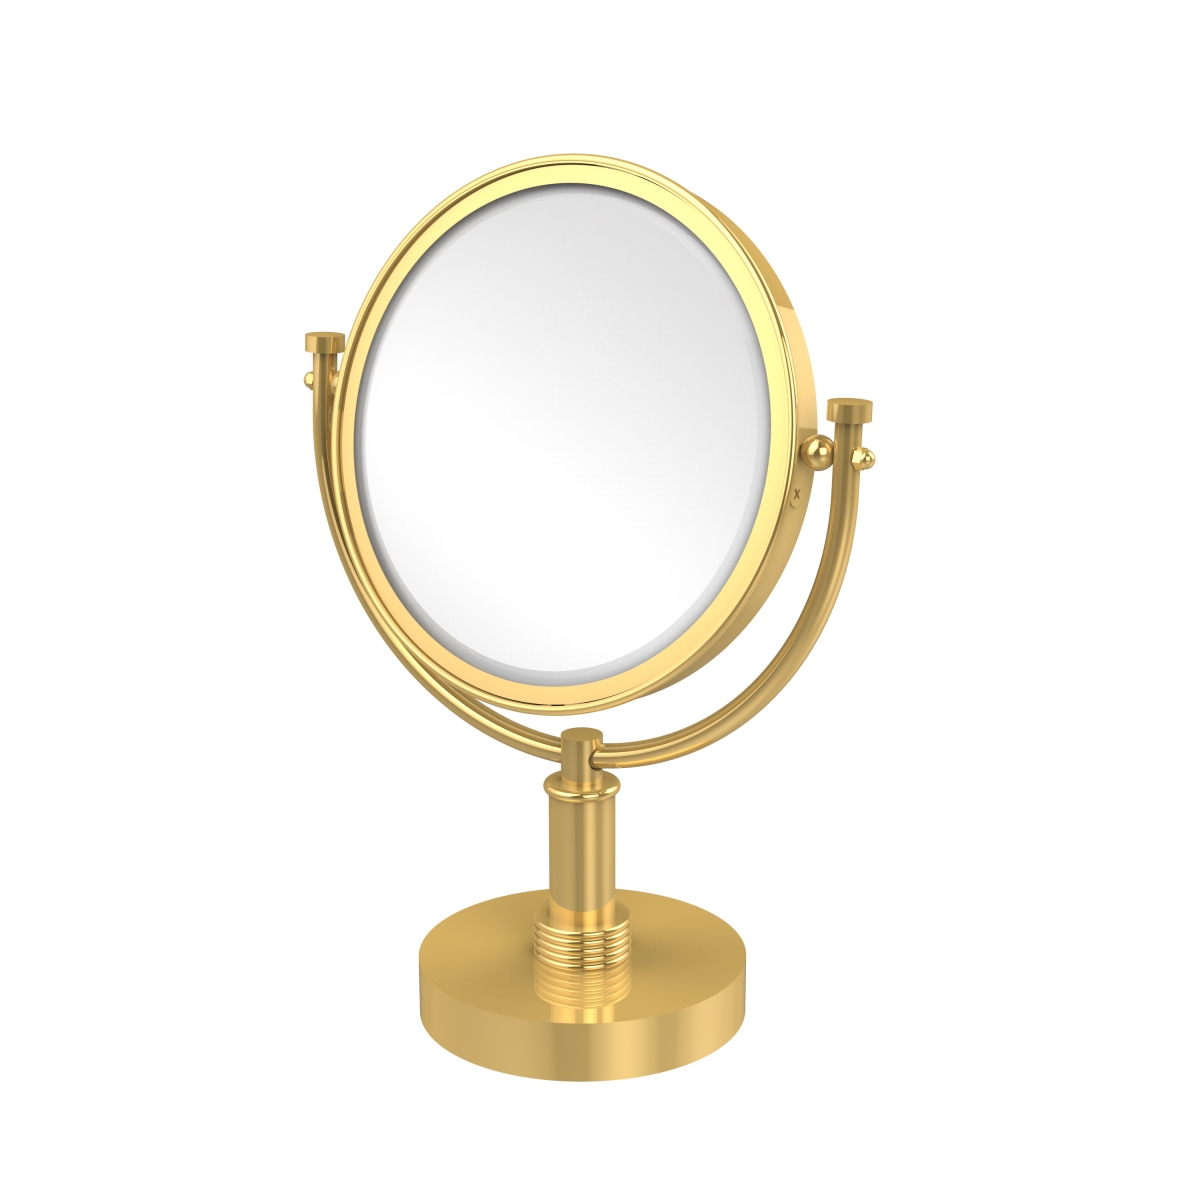 Picture of Allied Brass DM-4G-2X-PB 8 in. Vanity Top Make-Up Mirror 2X Magnification, Polished Brass - 15 x 8 x 8 in.